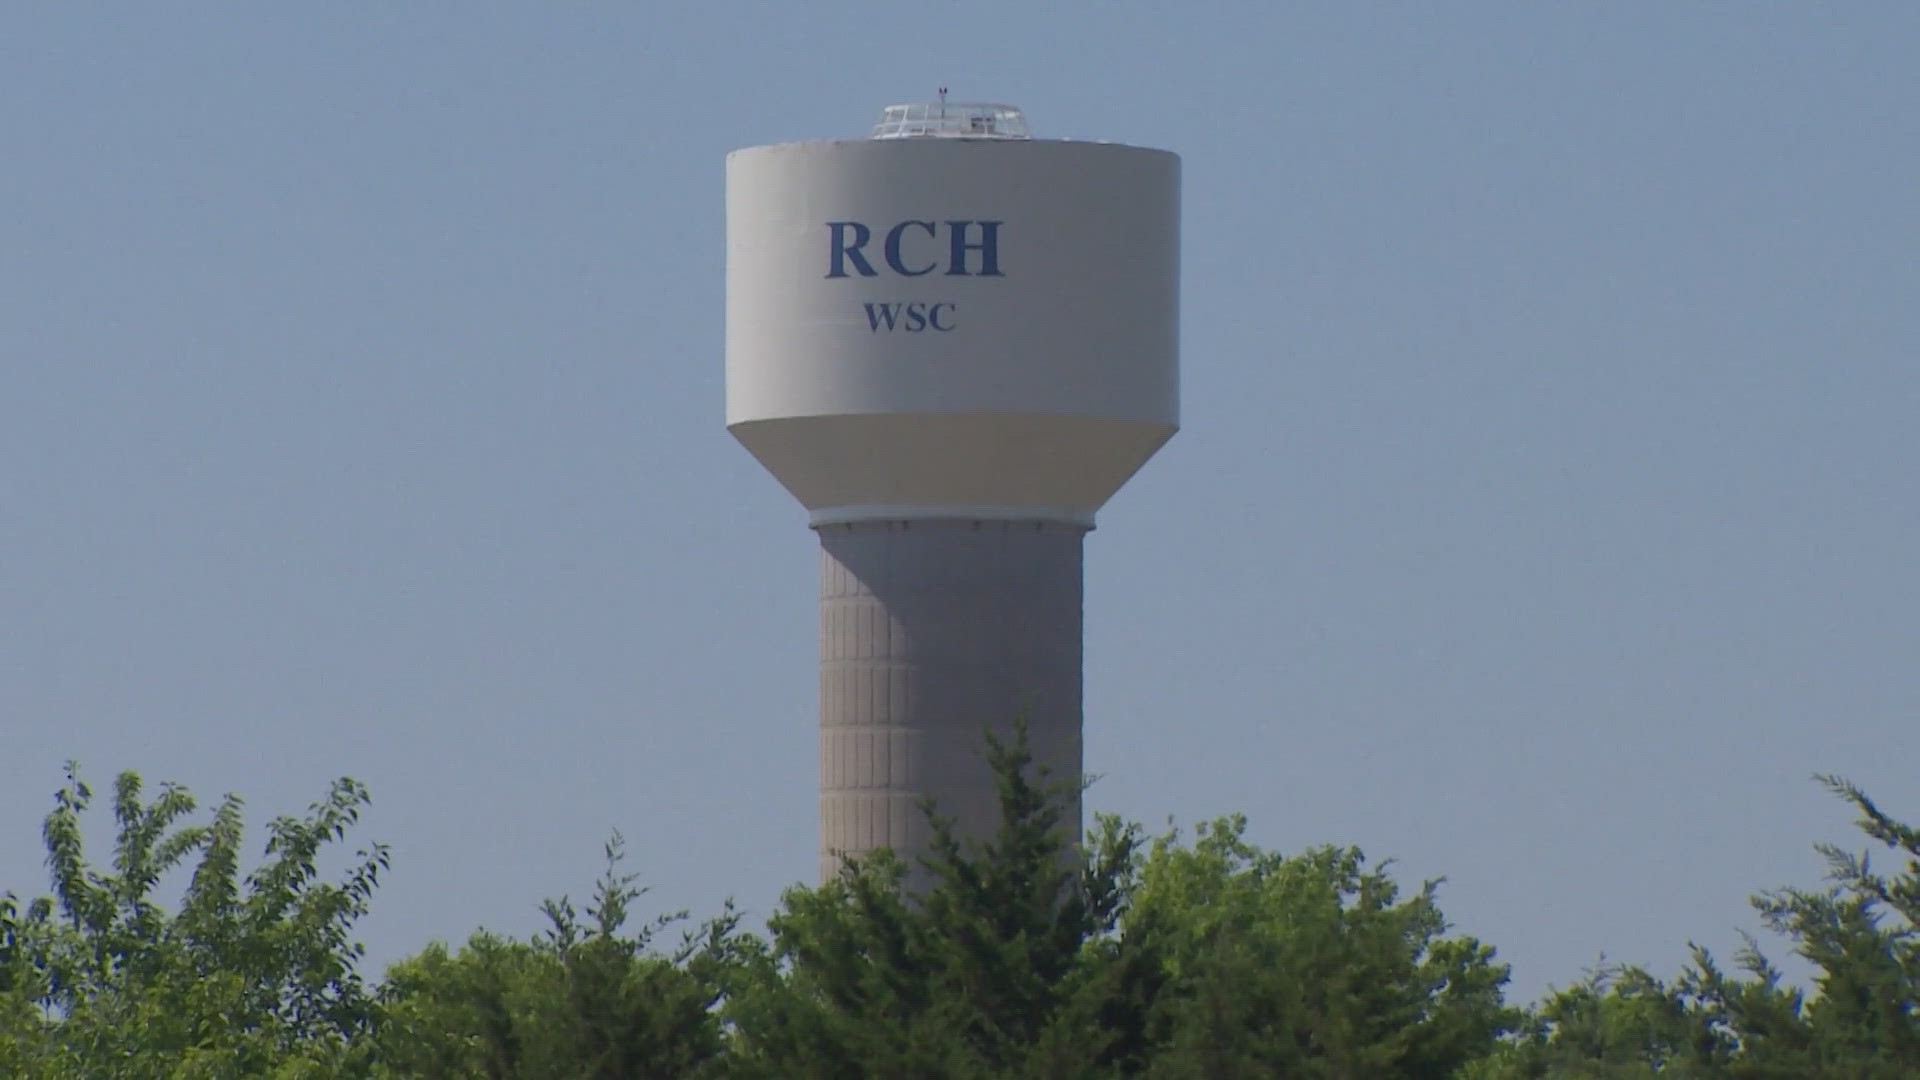 The board president of RCH Water Supply said water tanks usually sit at 20 feet when full and have been around eight feet for the past several days.